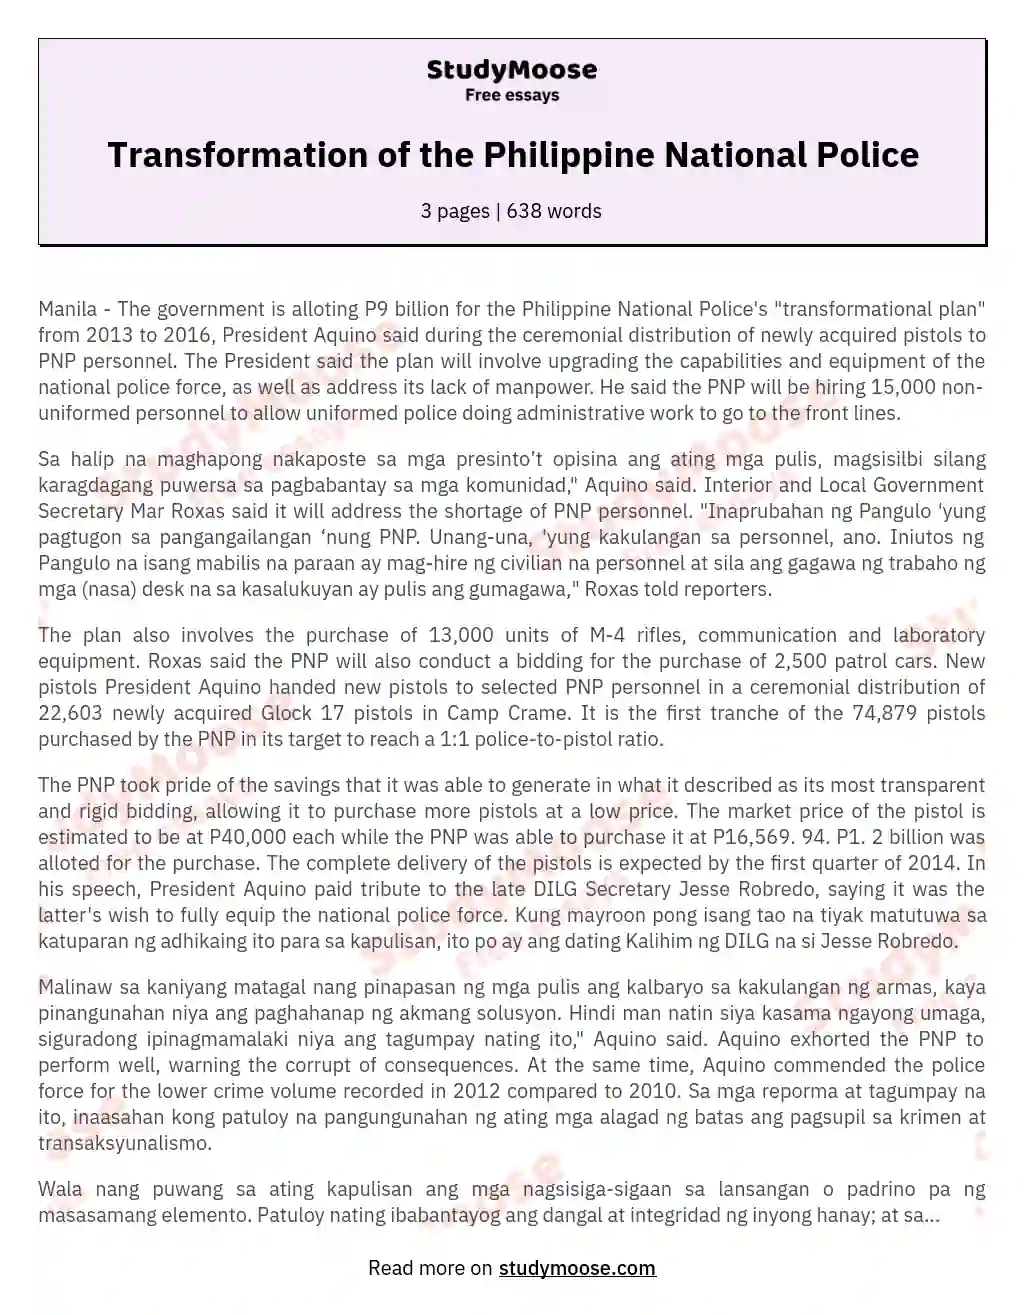 Transformation of the Philippine National Police essay